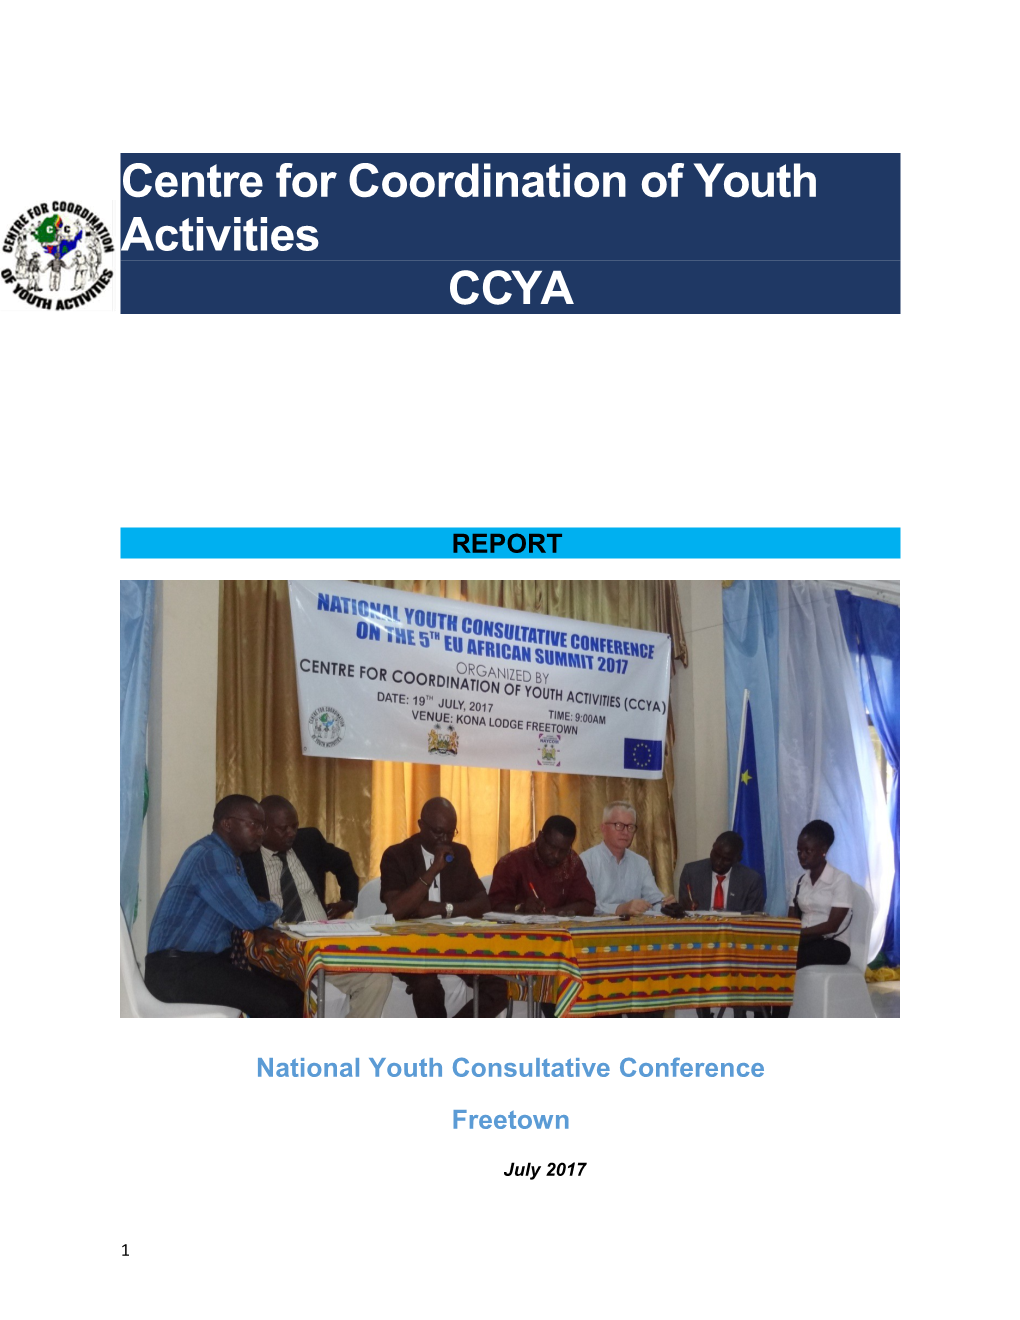 Centre for Coordination of Youth Activities